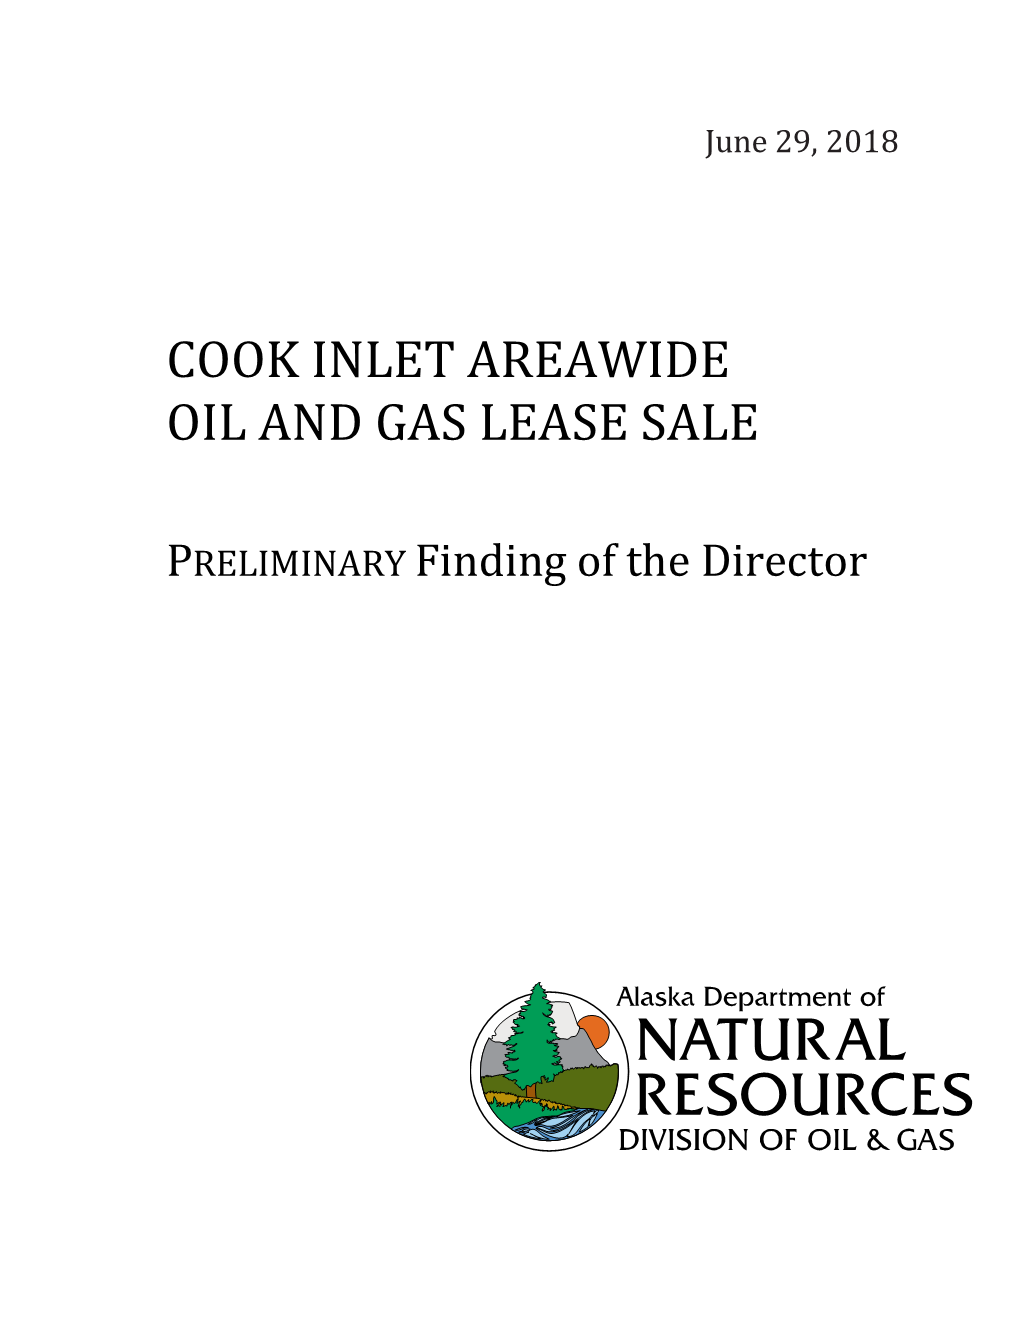 Cook Inlet Areawide Oil and Gas Lease Sale